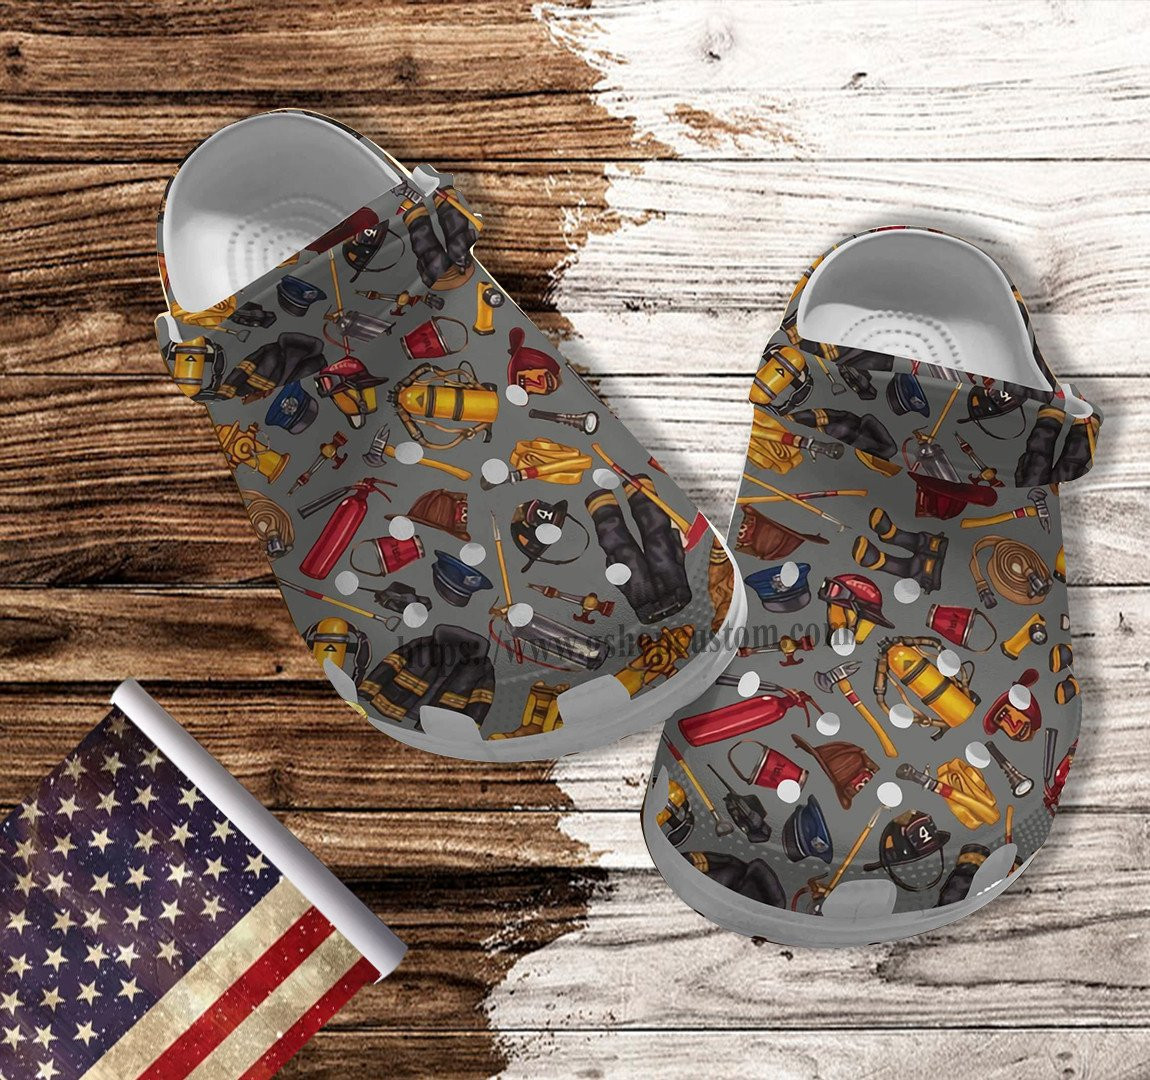 Fire Fighter Item Croc Shoes Gift Daughter- Girl Love Firefighter Shoes Croc Clogs Gift For Wife